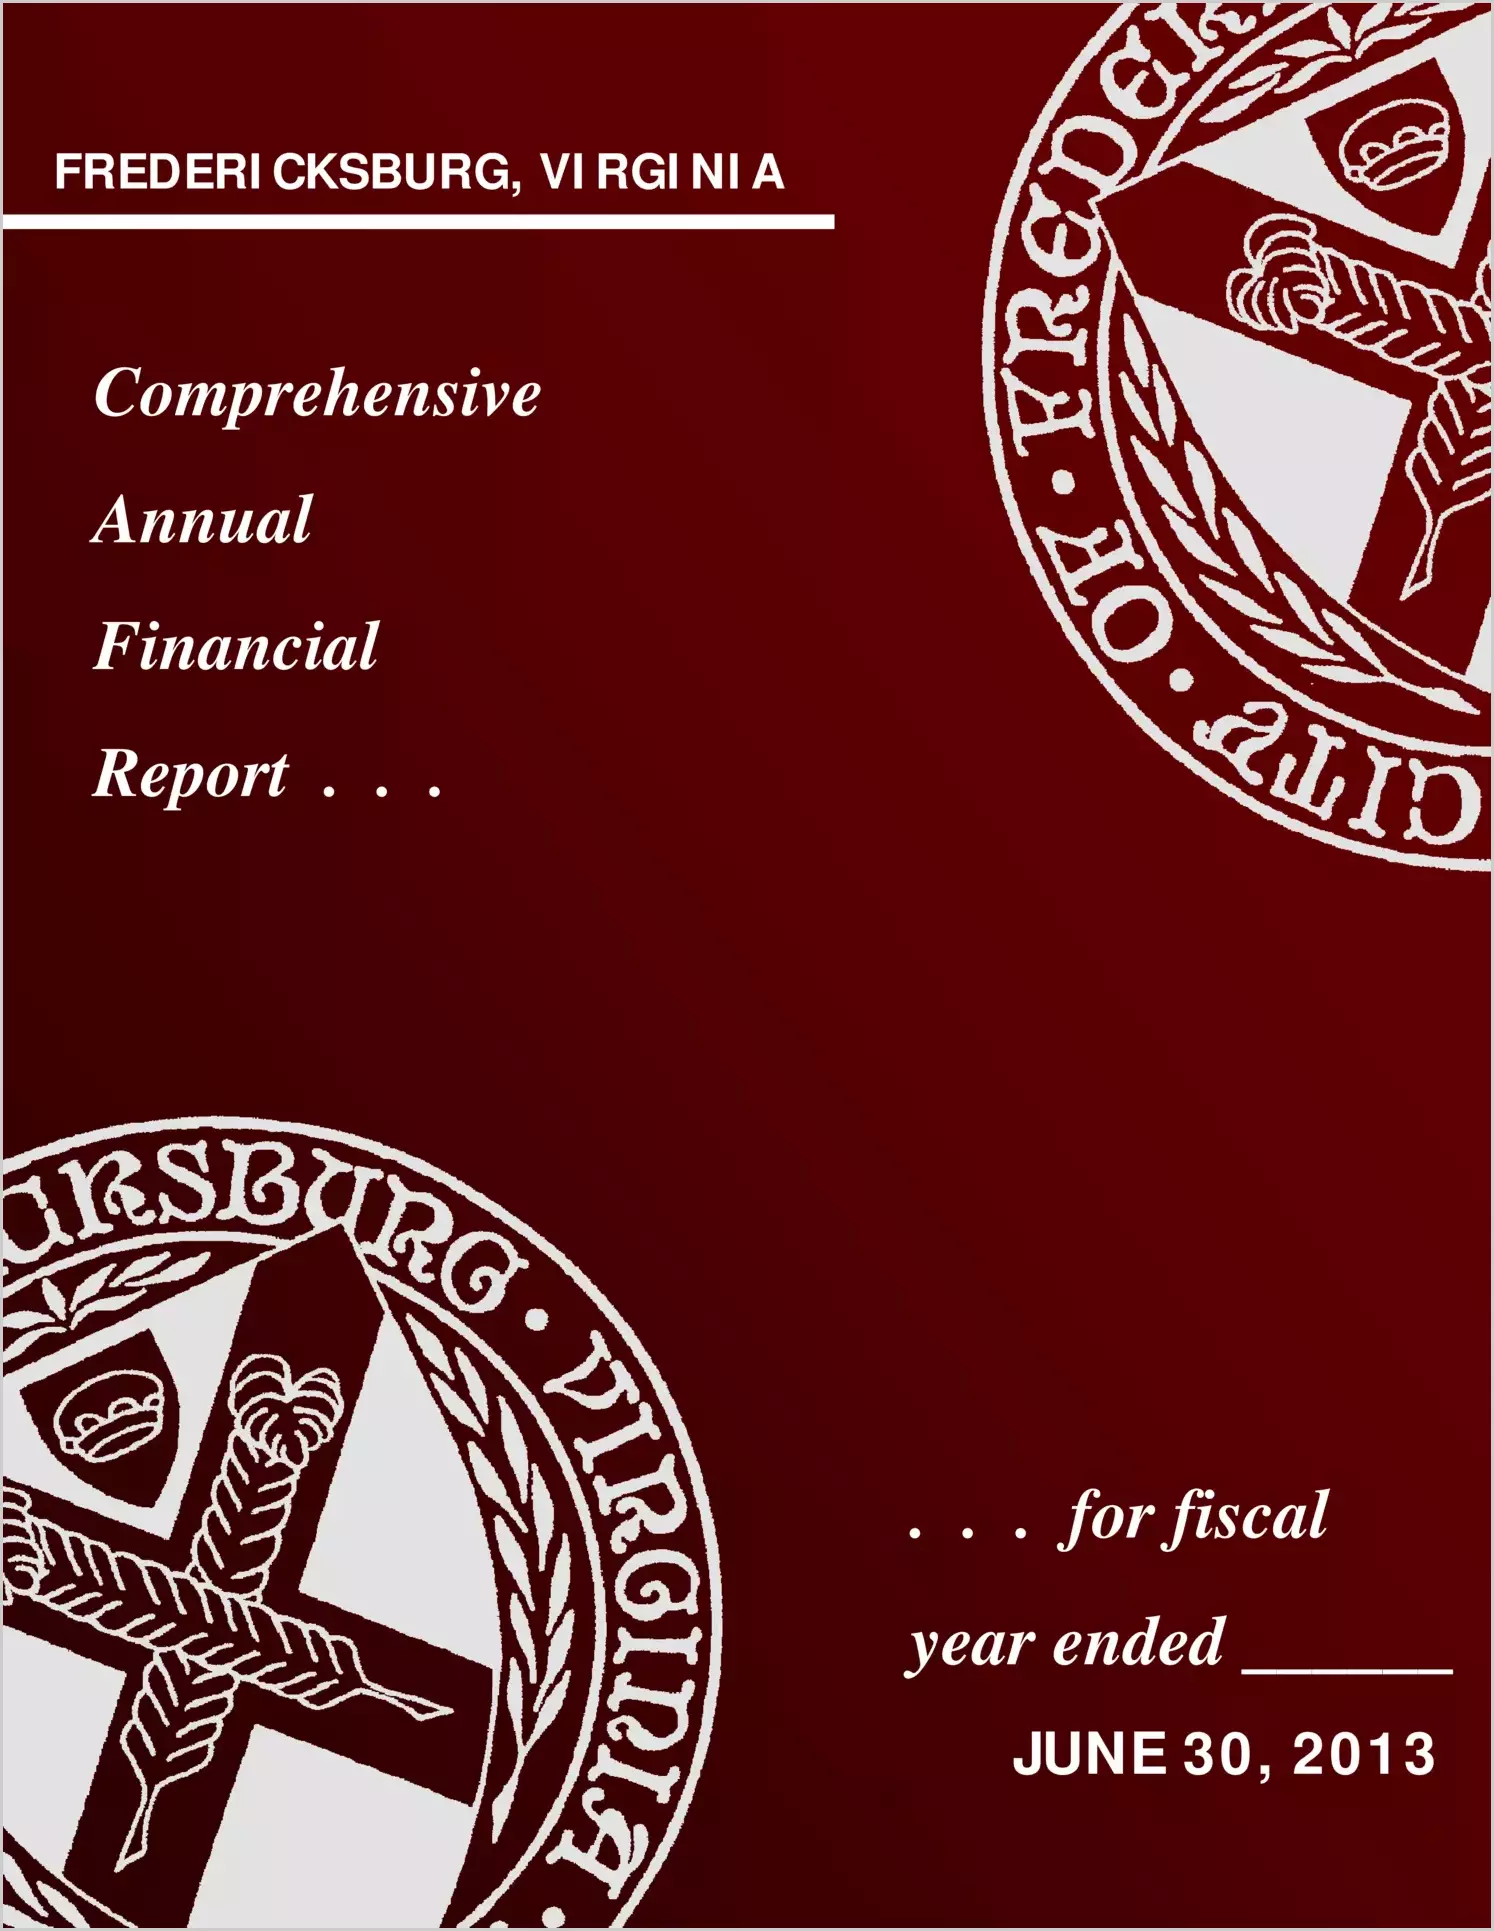 2013 Annual Financial Report for City of Fredericksburg